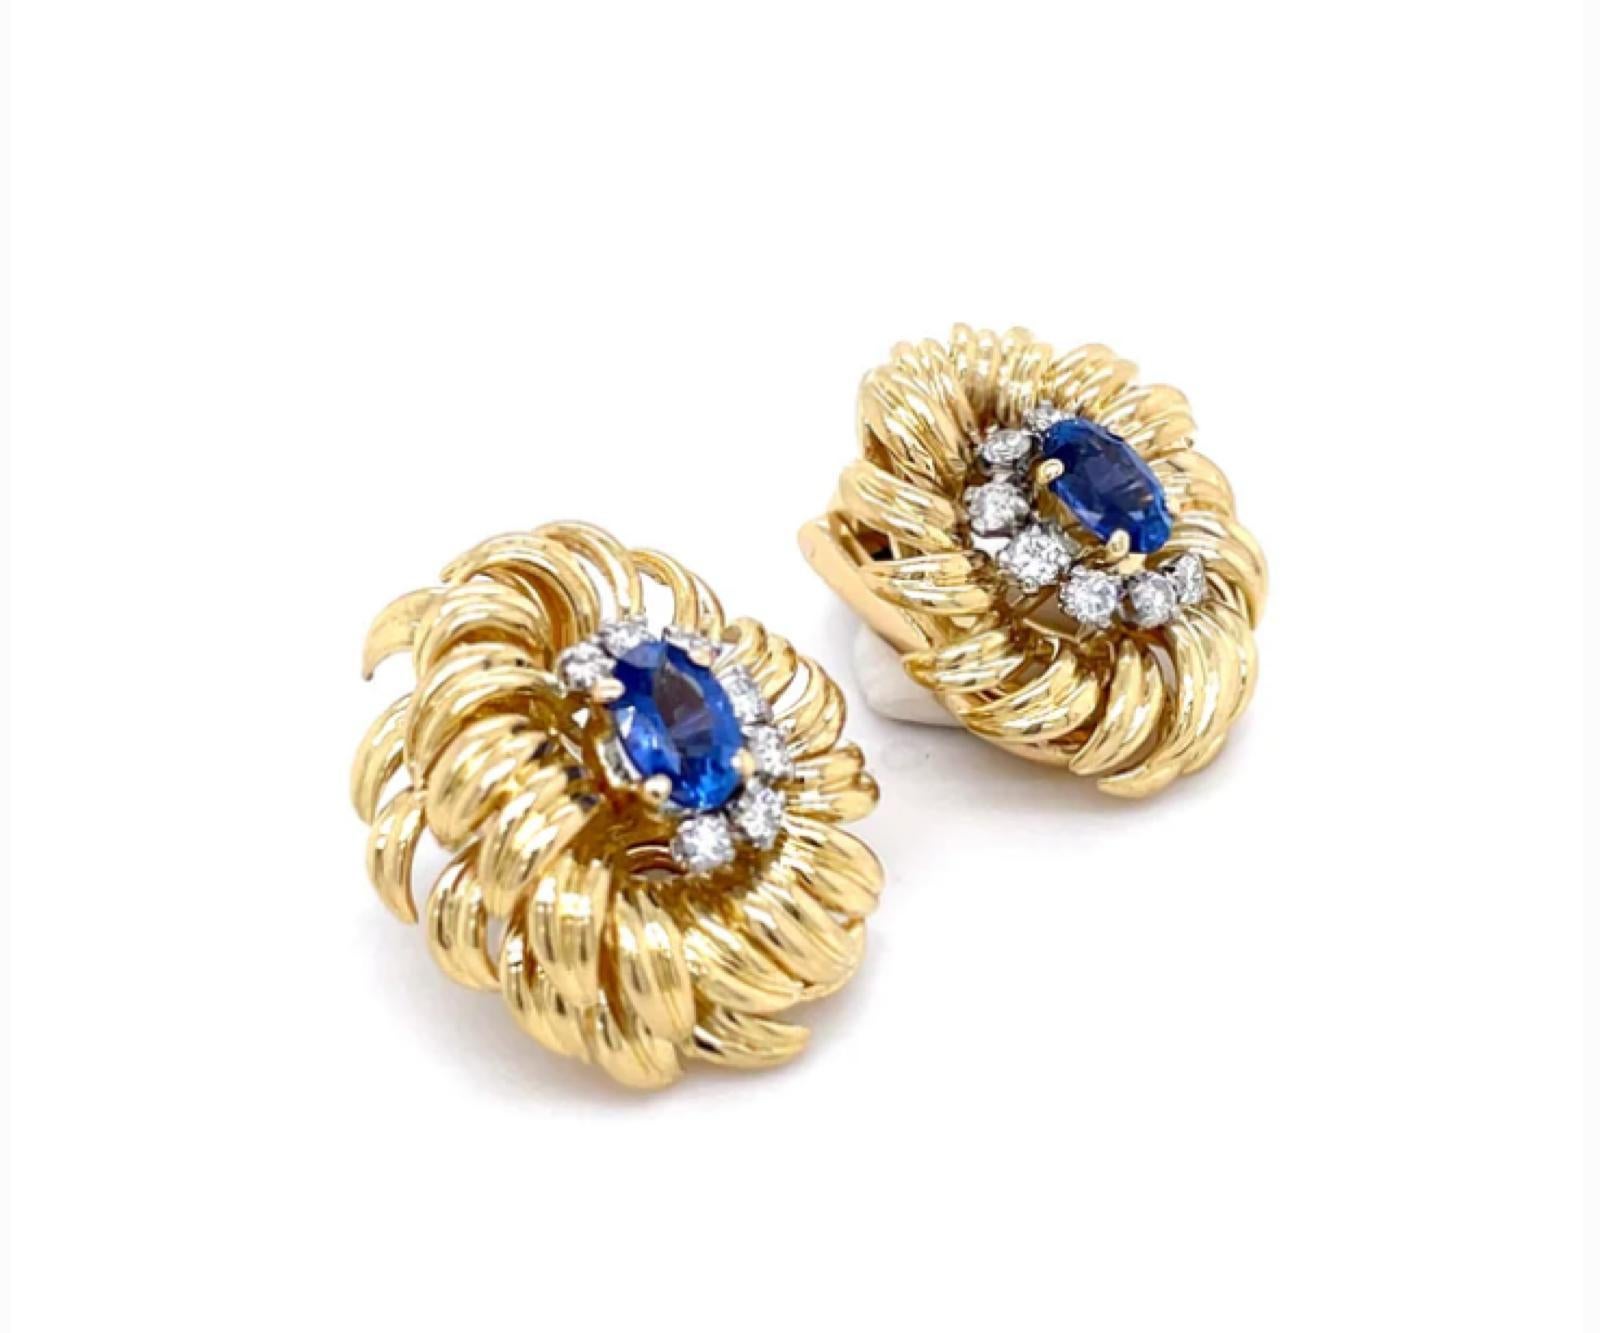 A pair of Kutchinsky 18 karat yellow gold sapphire and diamond clip earrings

A fantastic statement pair of earrings, each designed as a floral cluster, the leaves of plain polished gold are set to their centre with an oval cut sapphire for a total